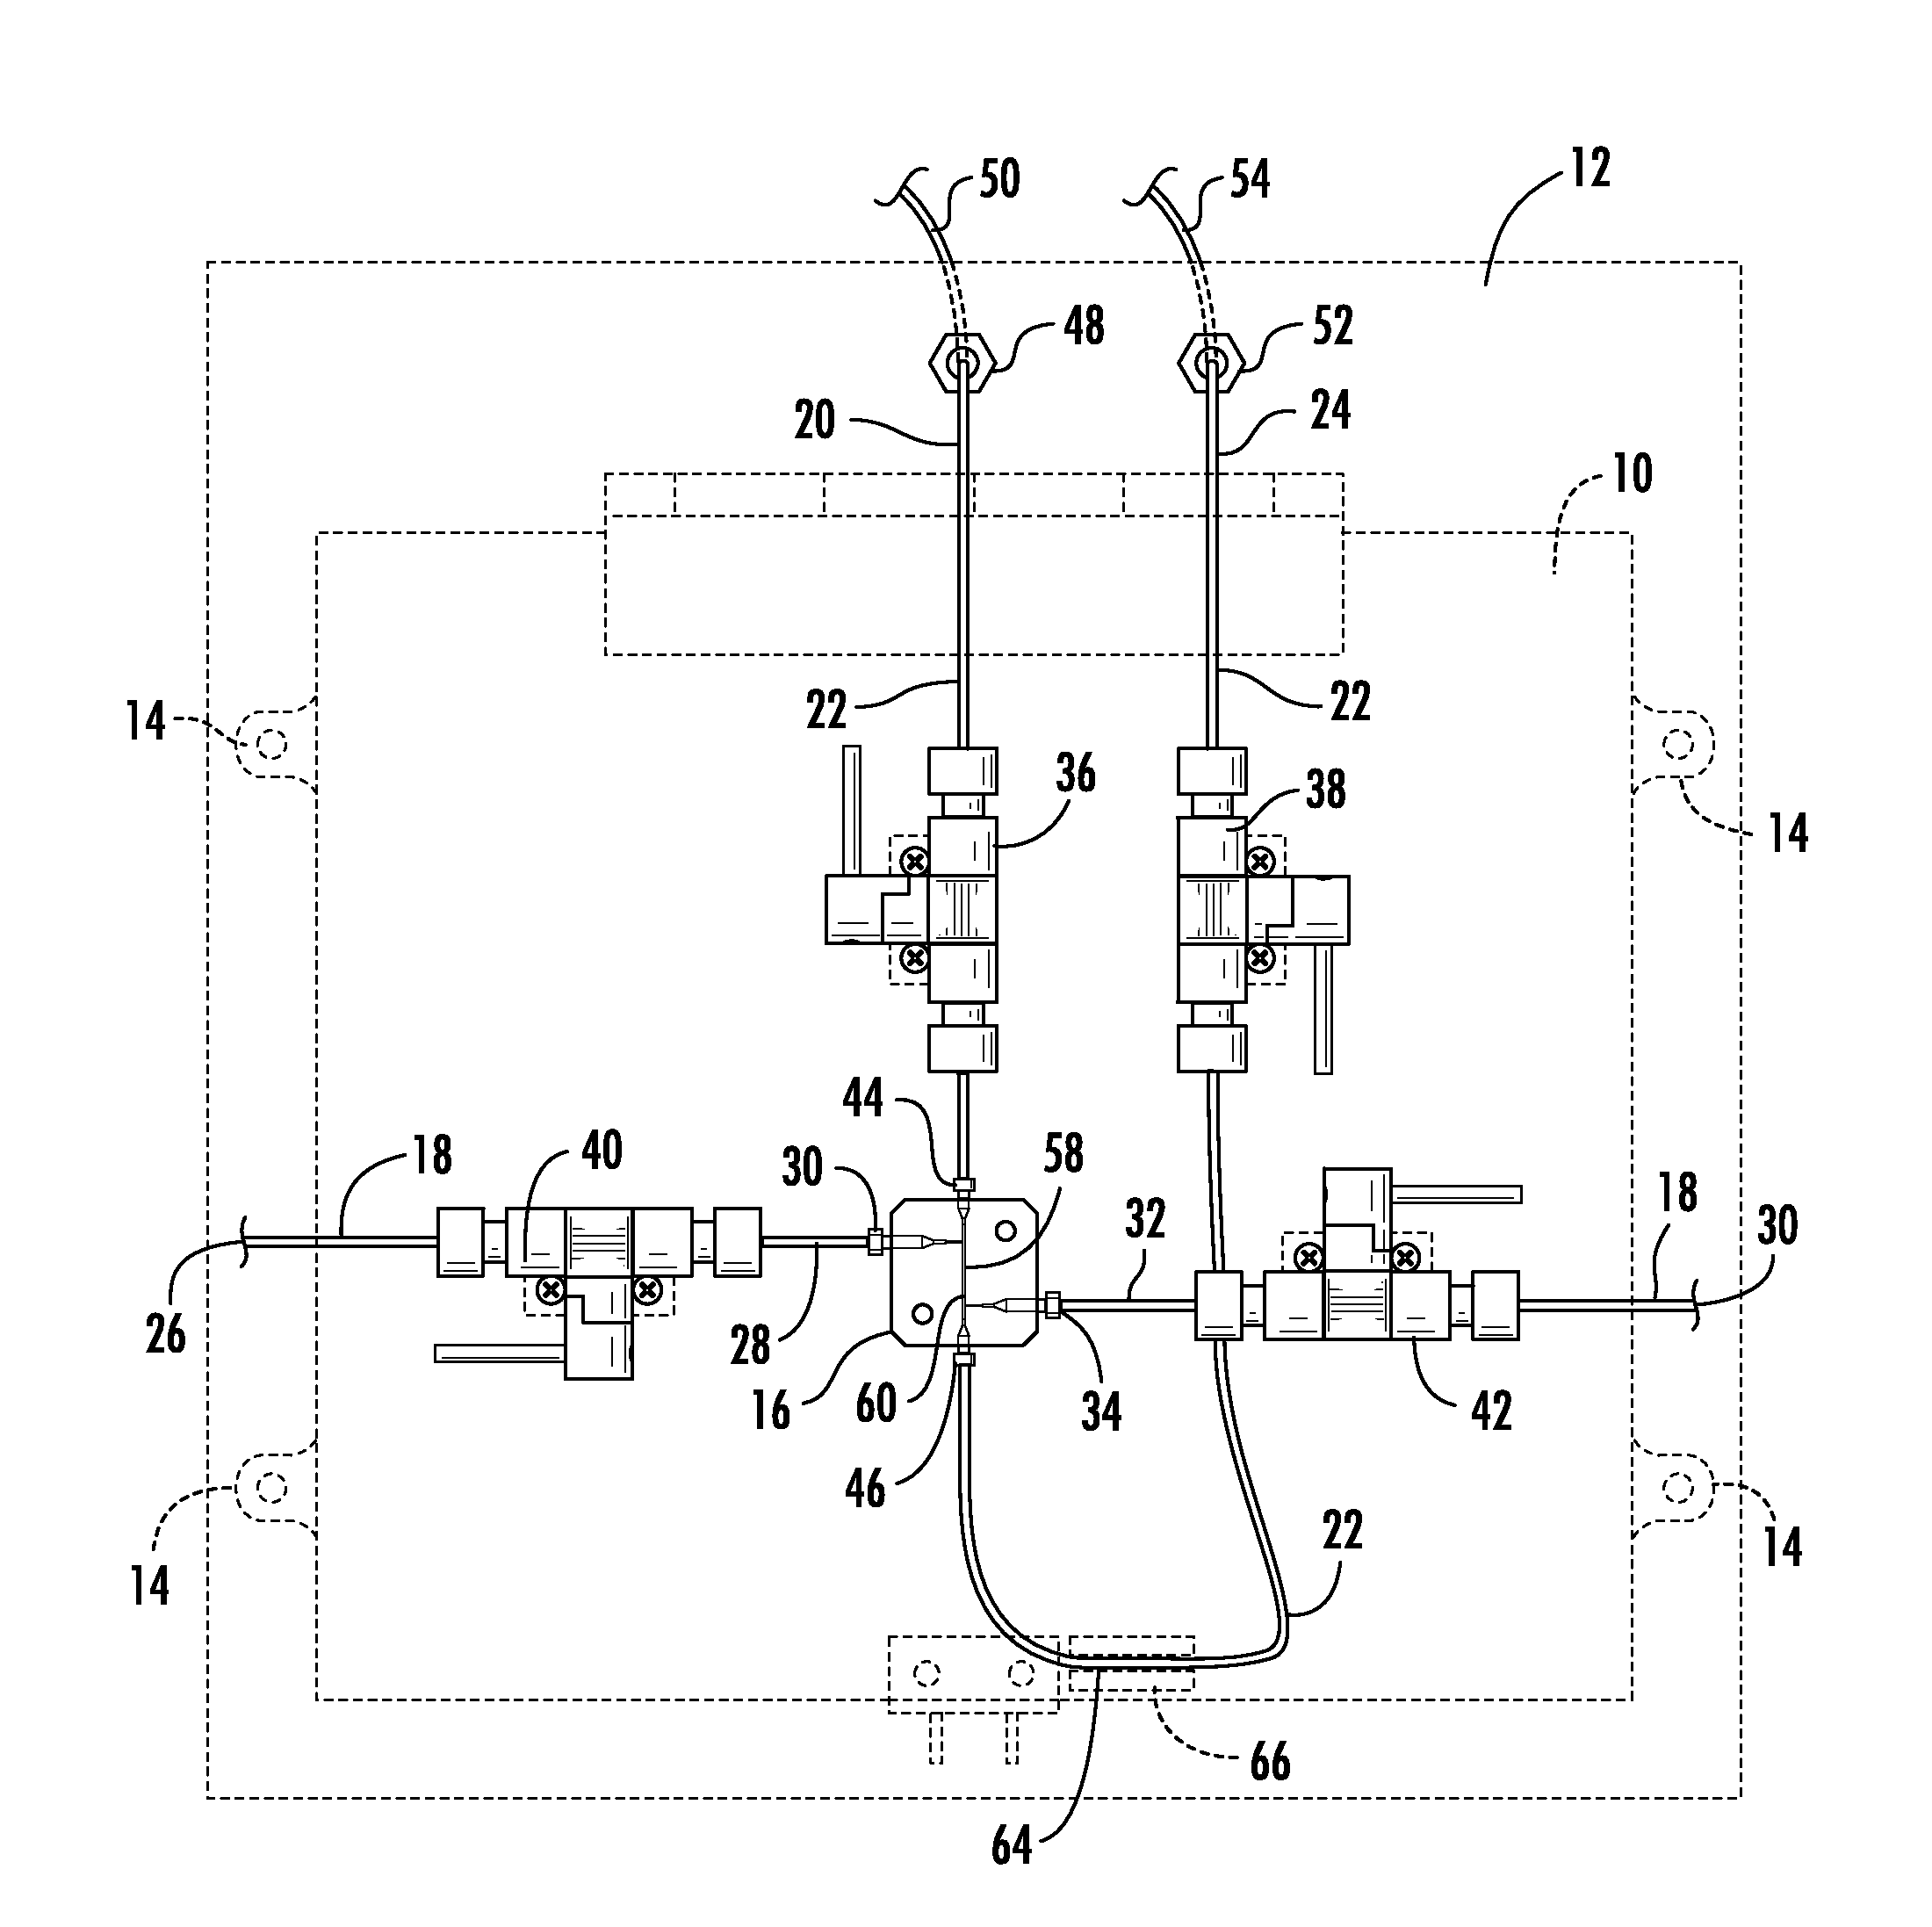 Multi-task immunoaffinity device secured to a peripheral box and integrated to a capillary electrophoresis apparatus